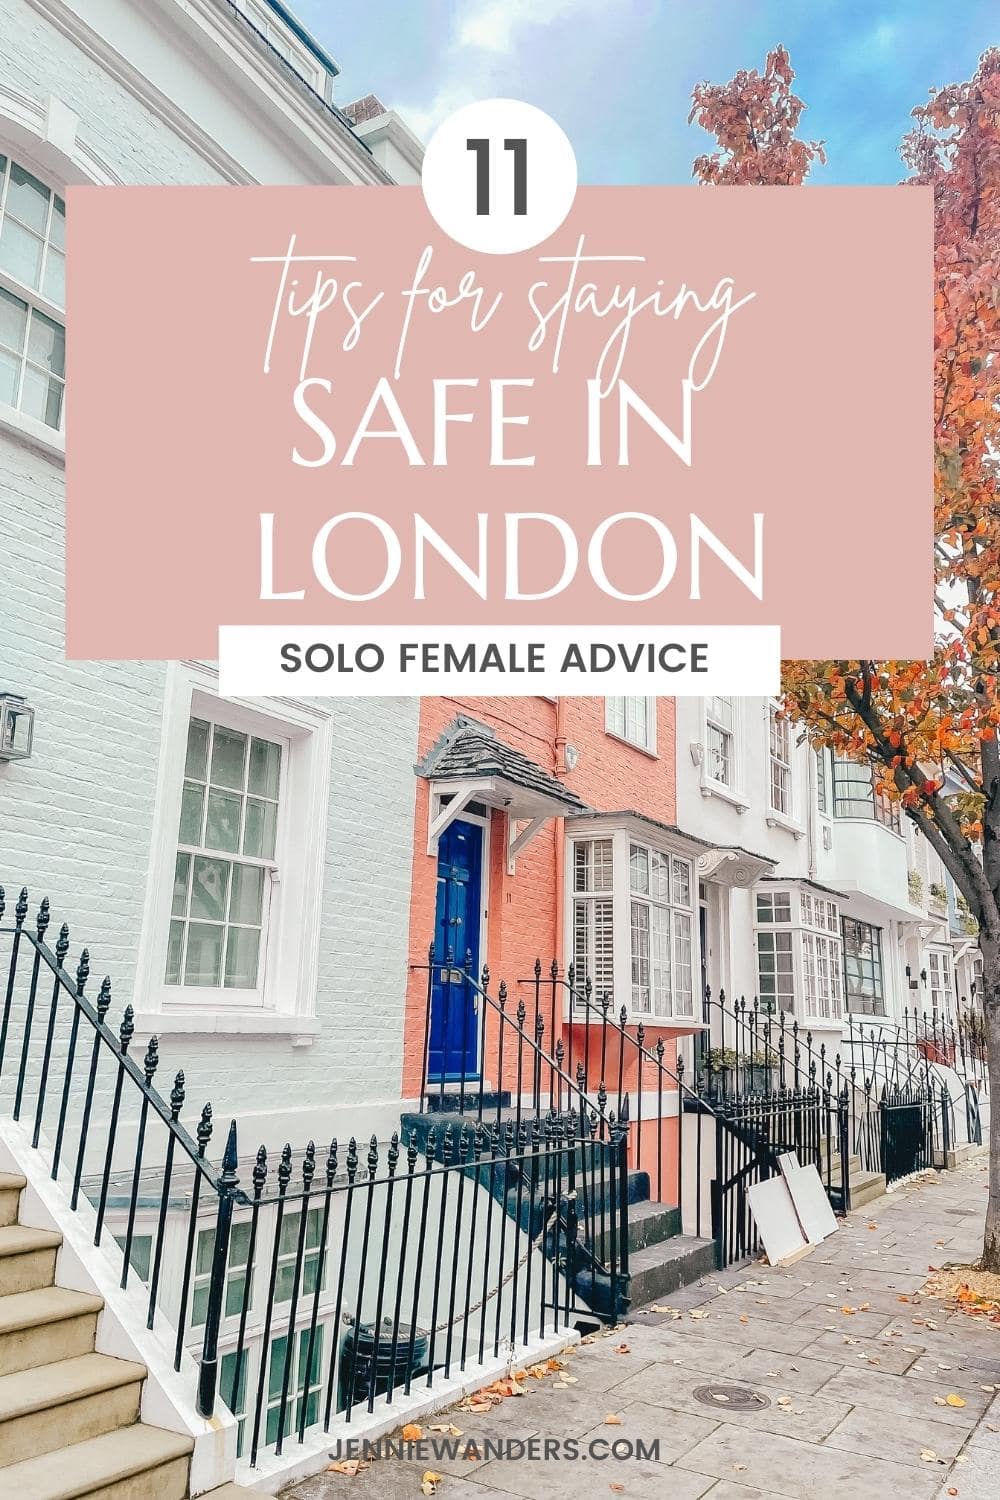 Is London safe? Solo female travel advice for London